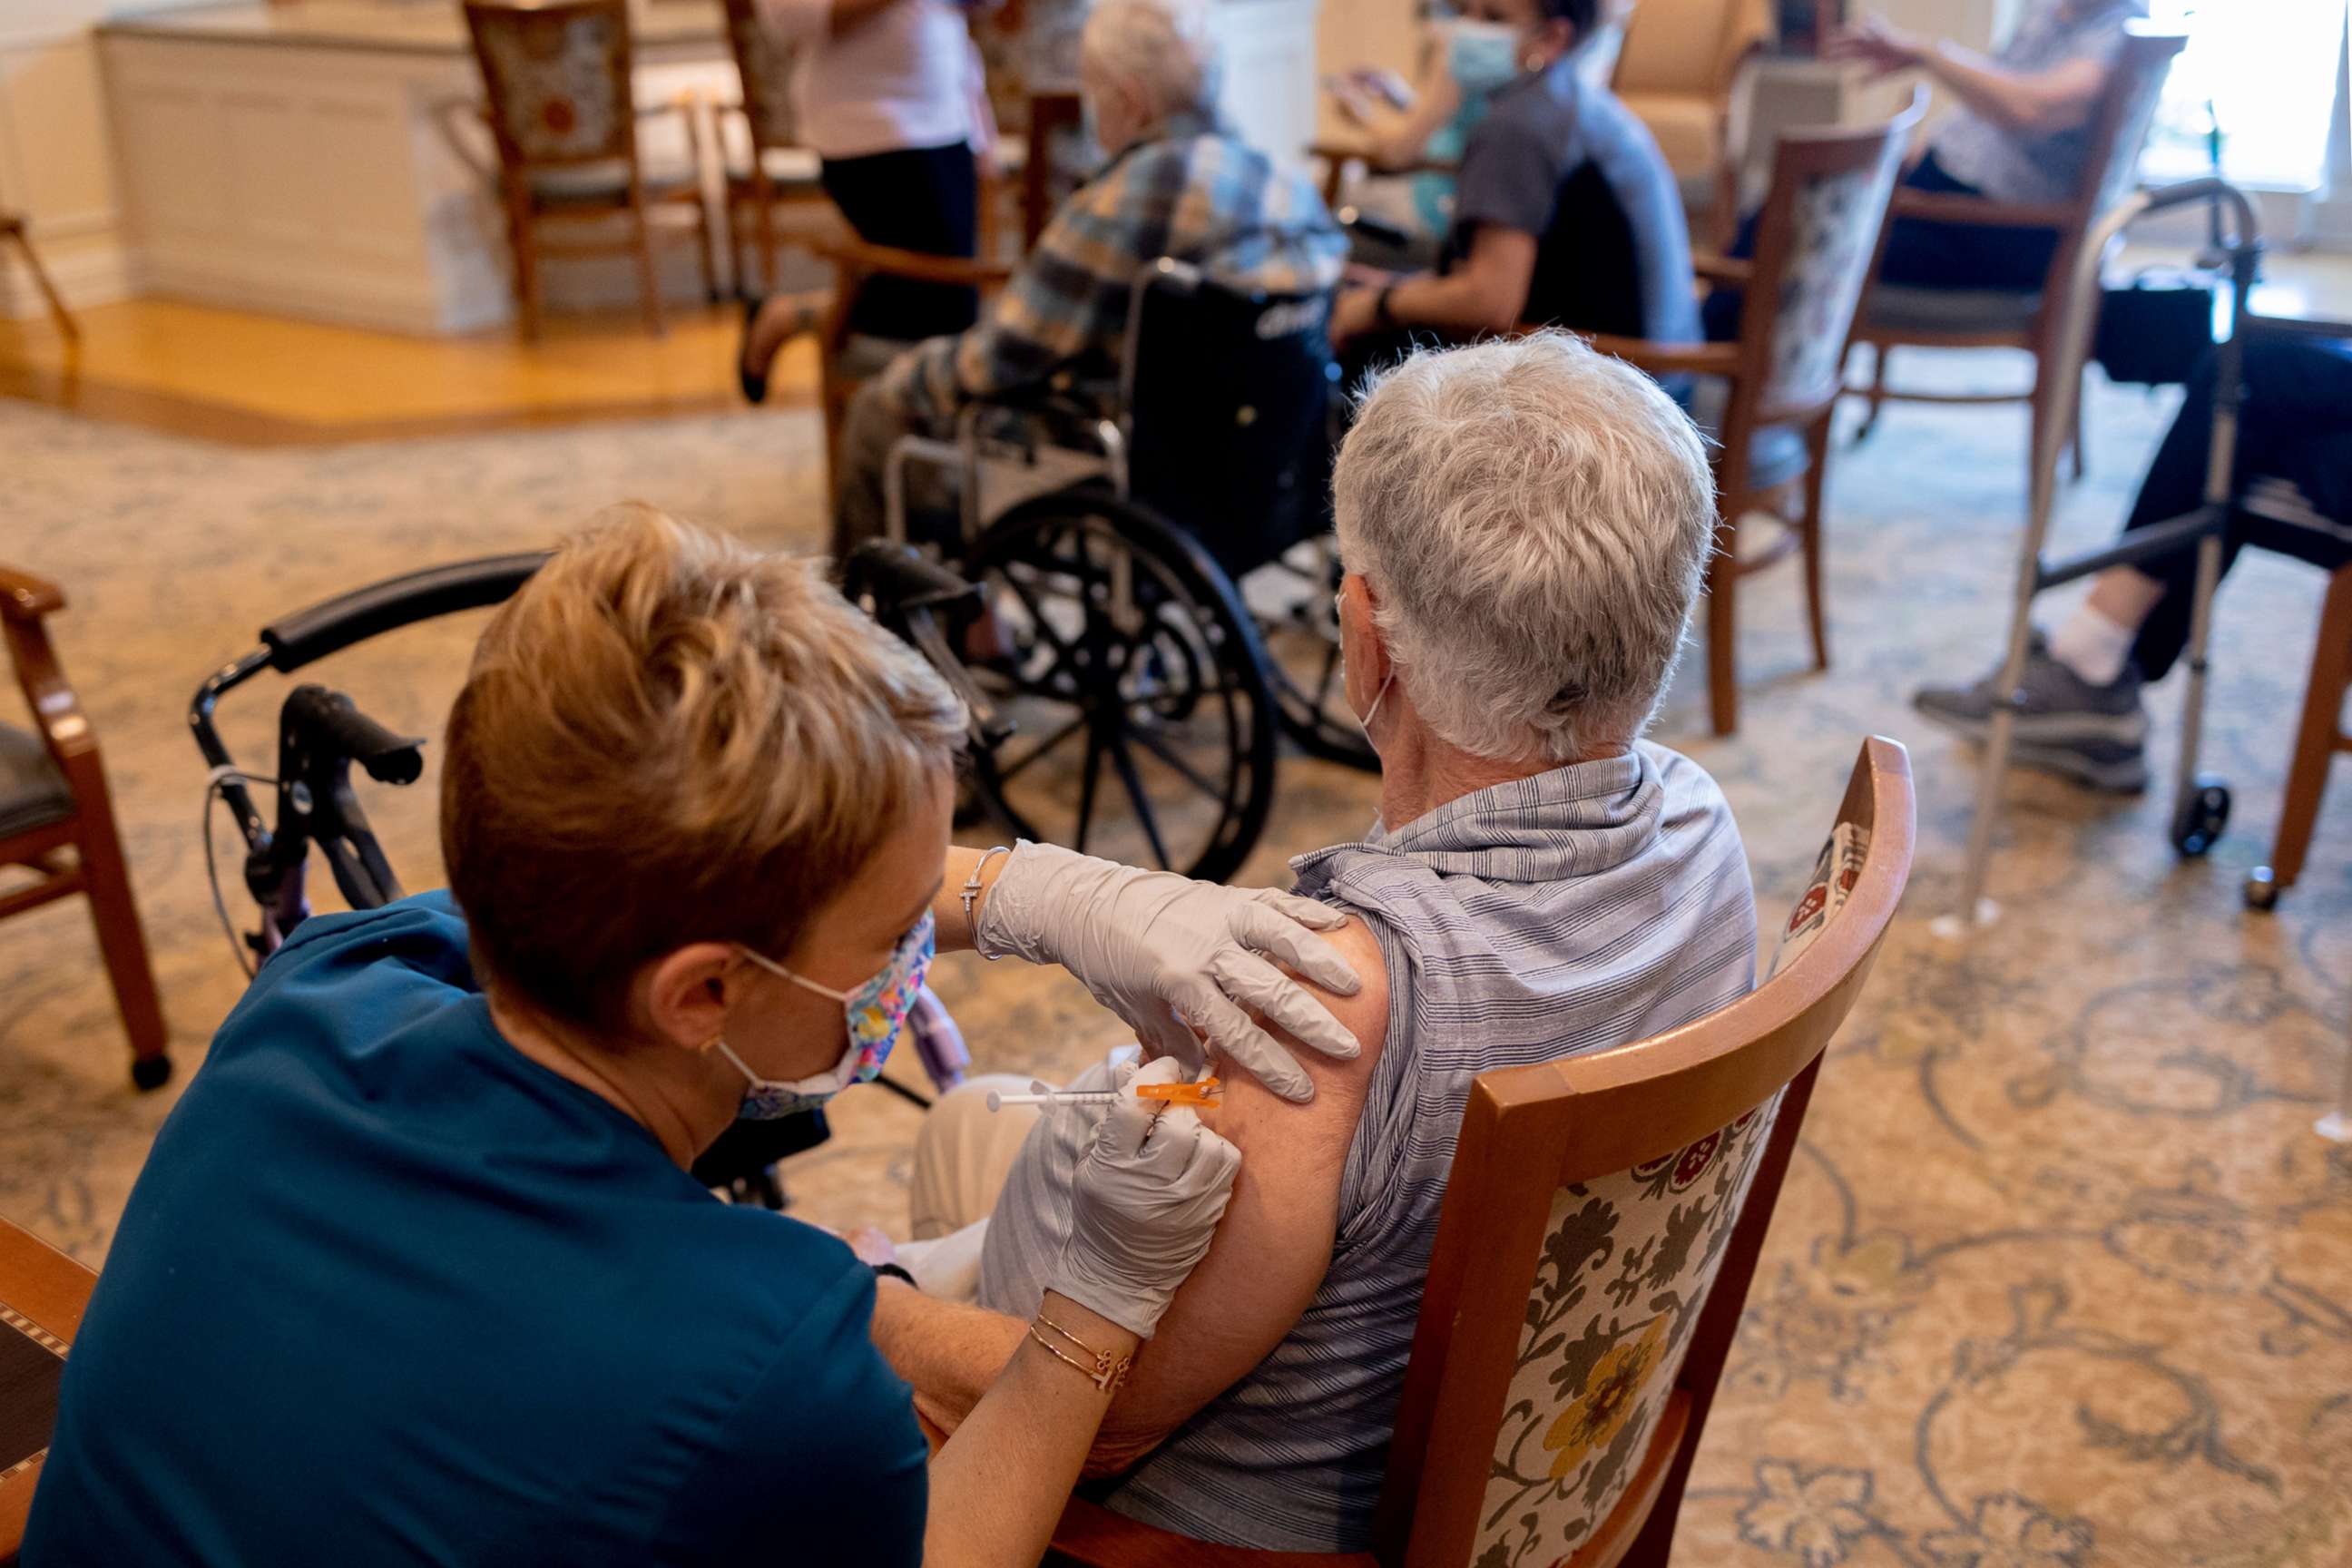 PHOTO: In this Aug. 25, 2012, file photo, a healthcare worker administers a third dose of the Pfizer-BioNTech COVID-19 vaccine at a senior living facility in Worcester, Penn.